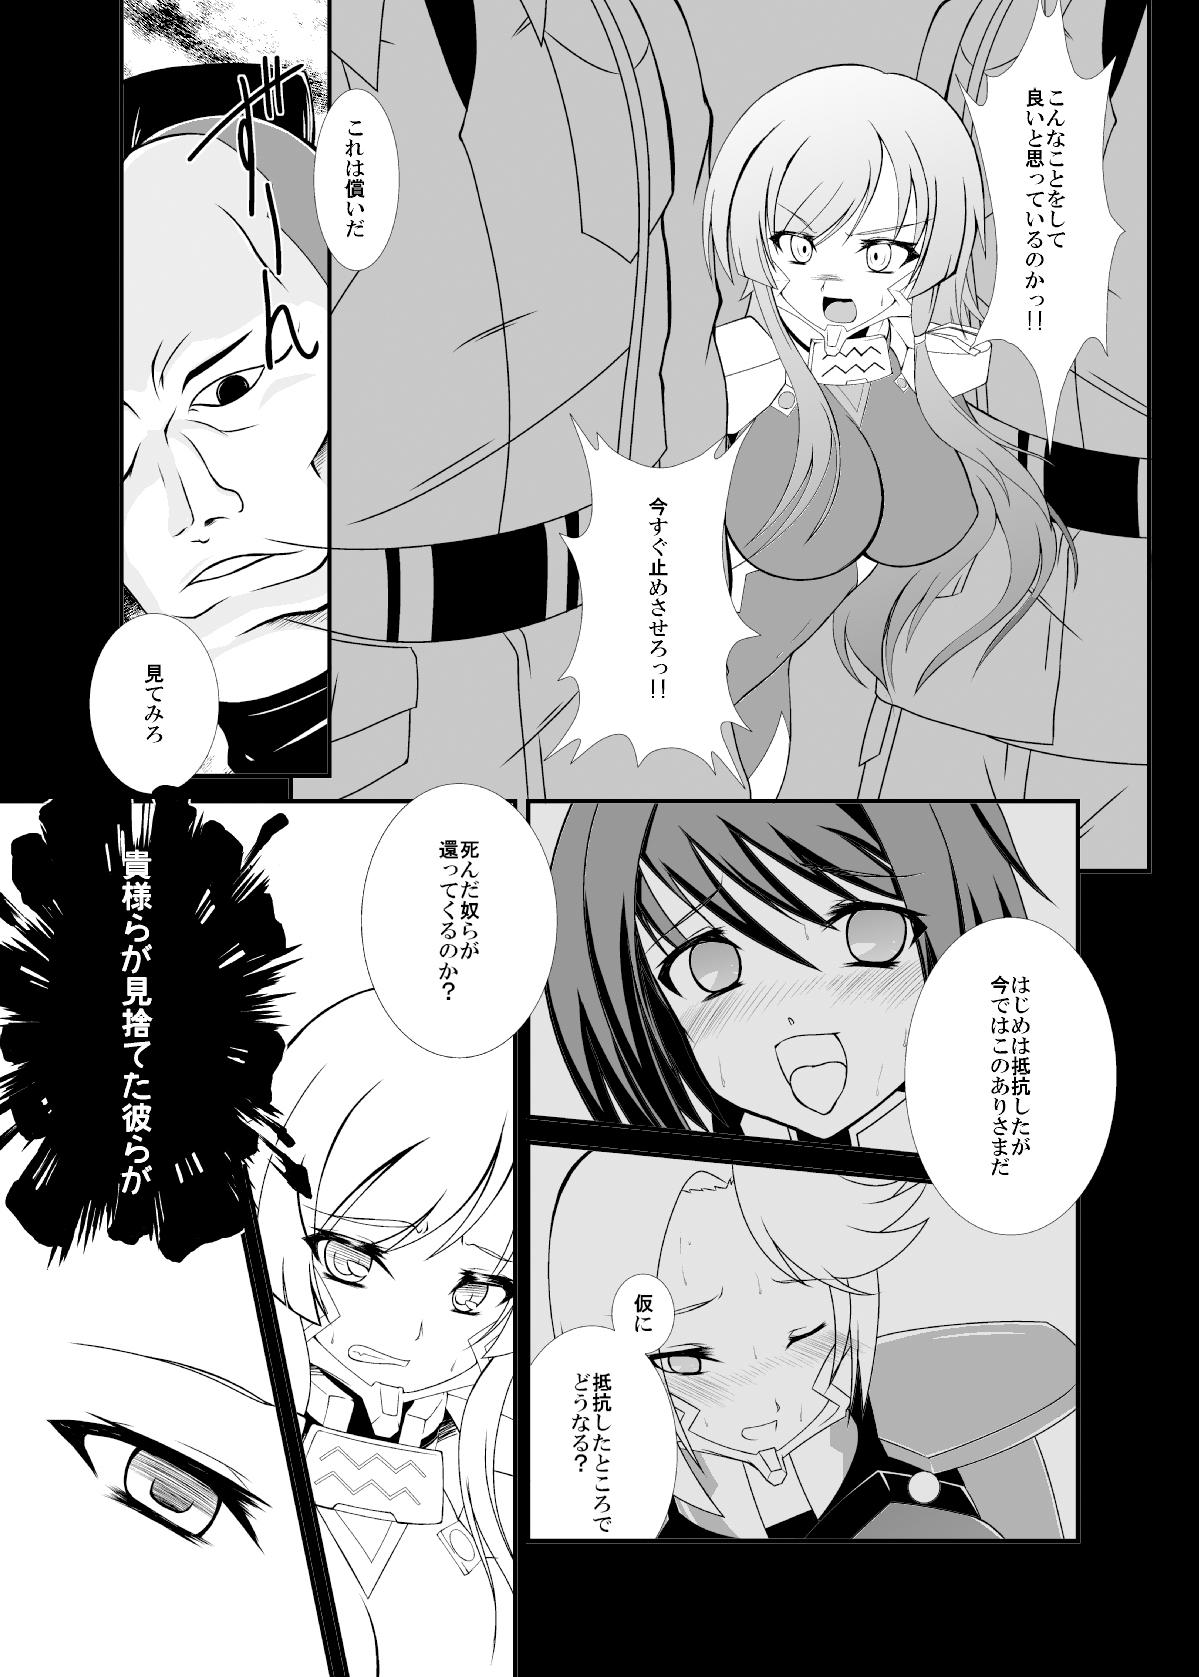 Breasts KDT - Muv-luv alternative total eclipse Rimming - Page 4